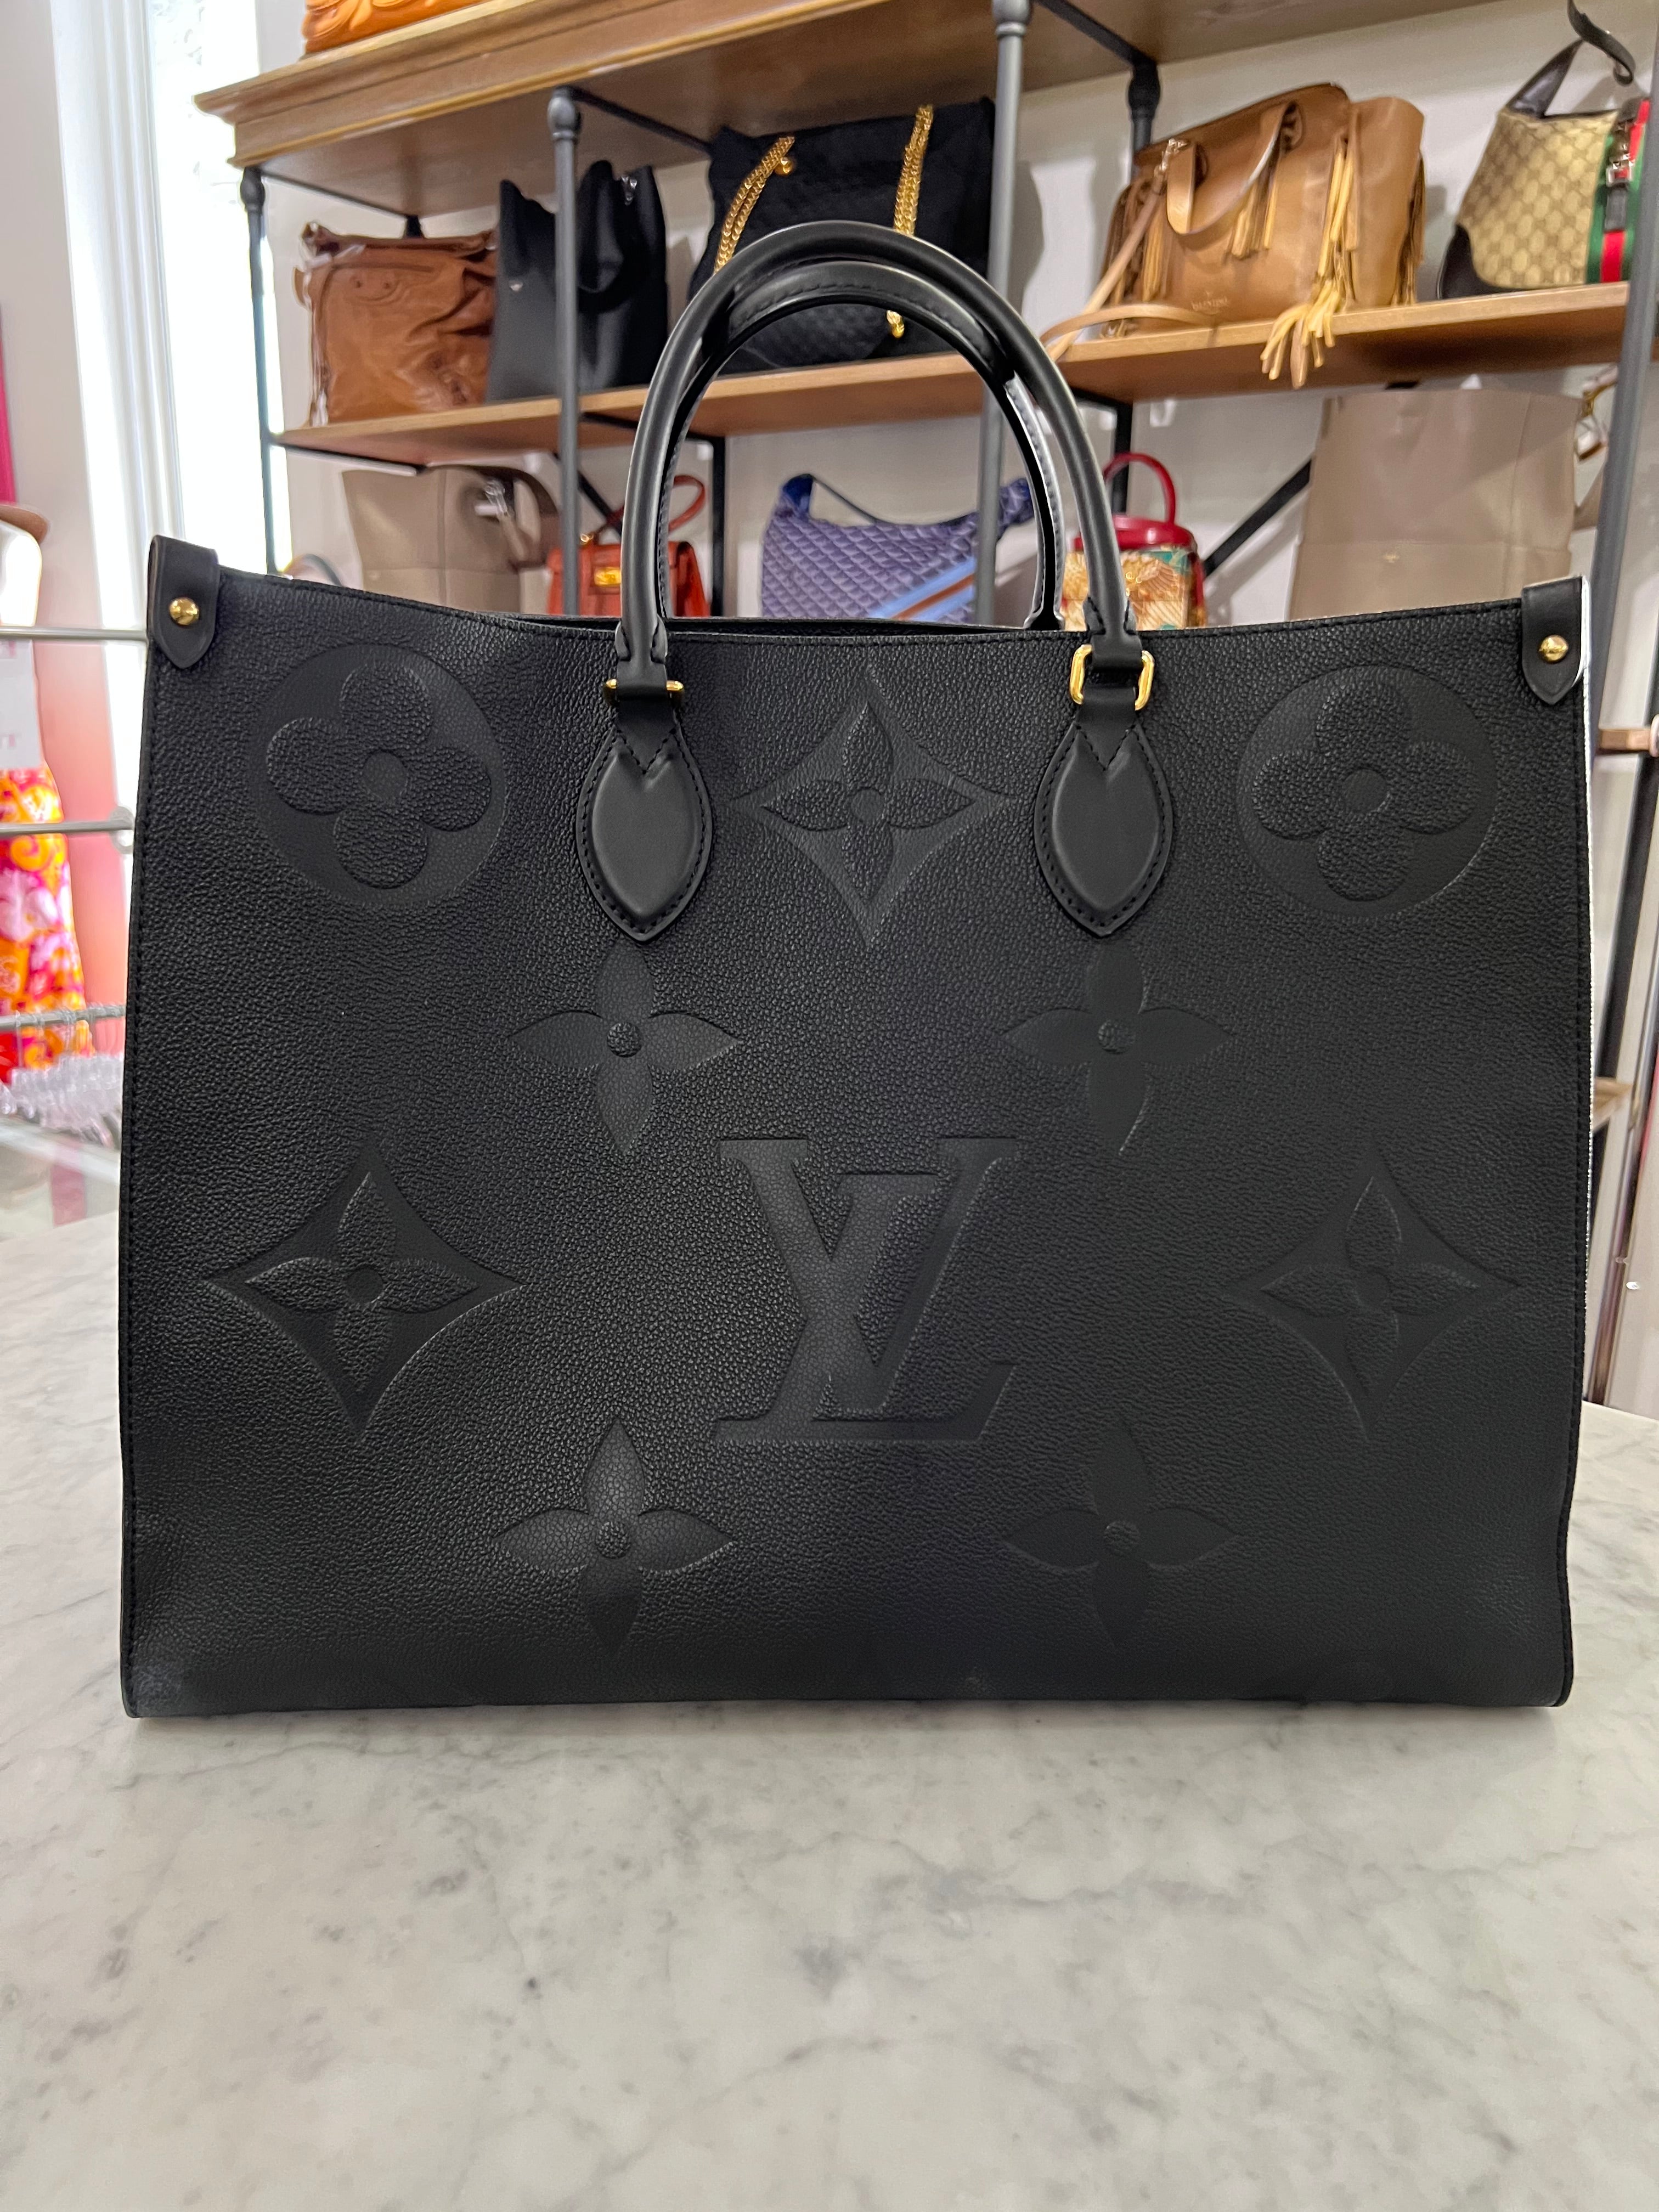 sold Out* Louis Vuitton Onthego Mm Handbag/tote